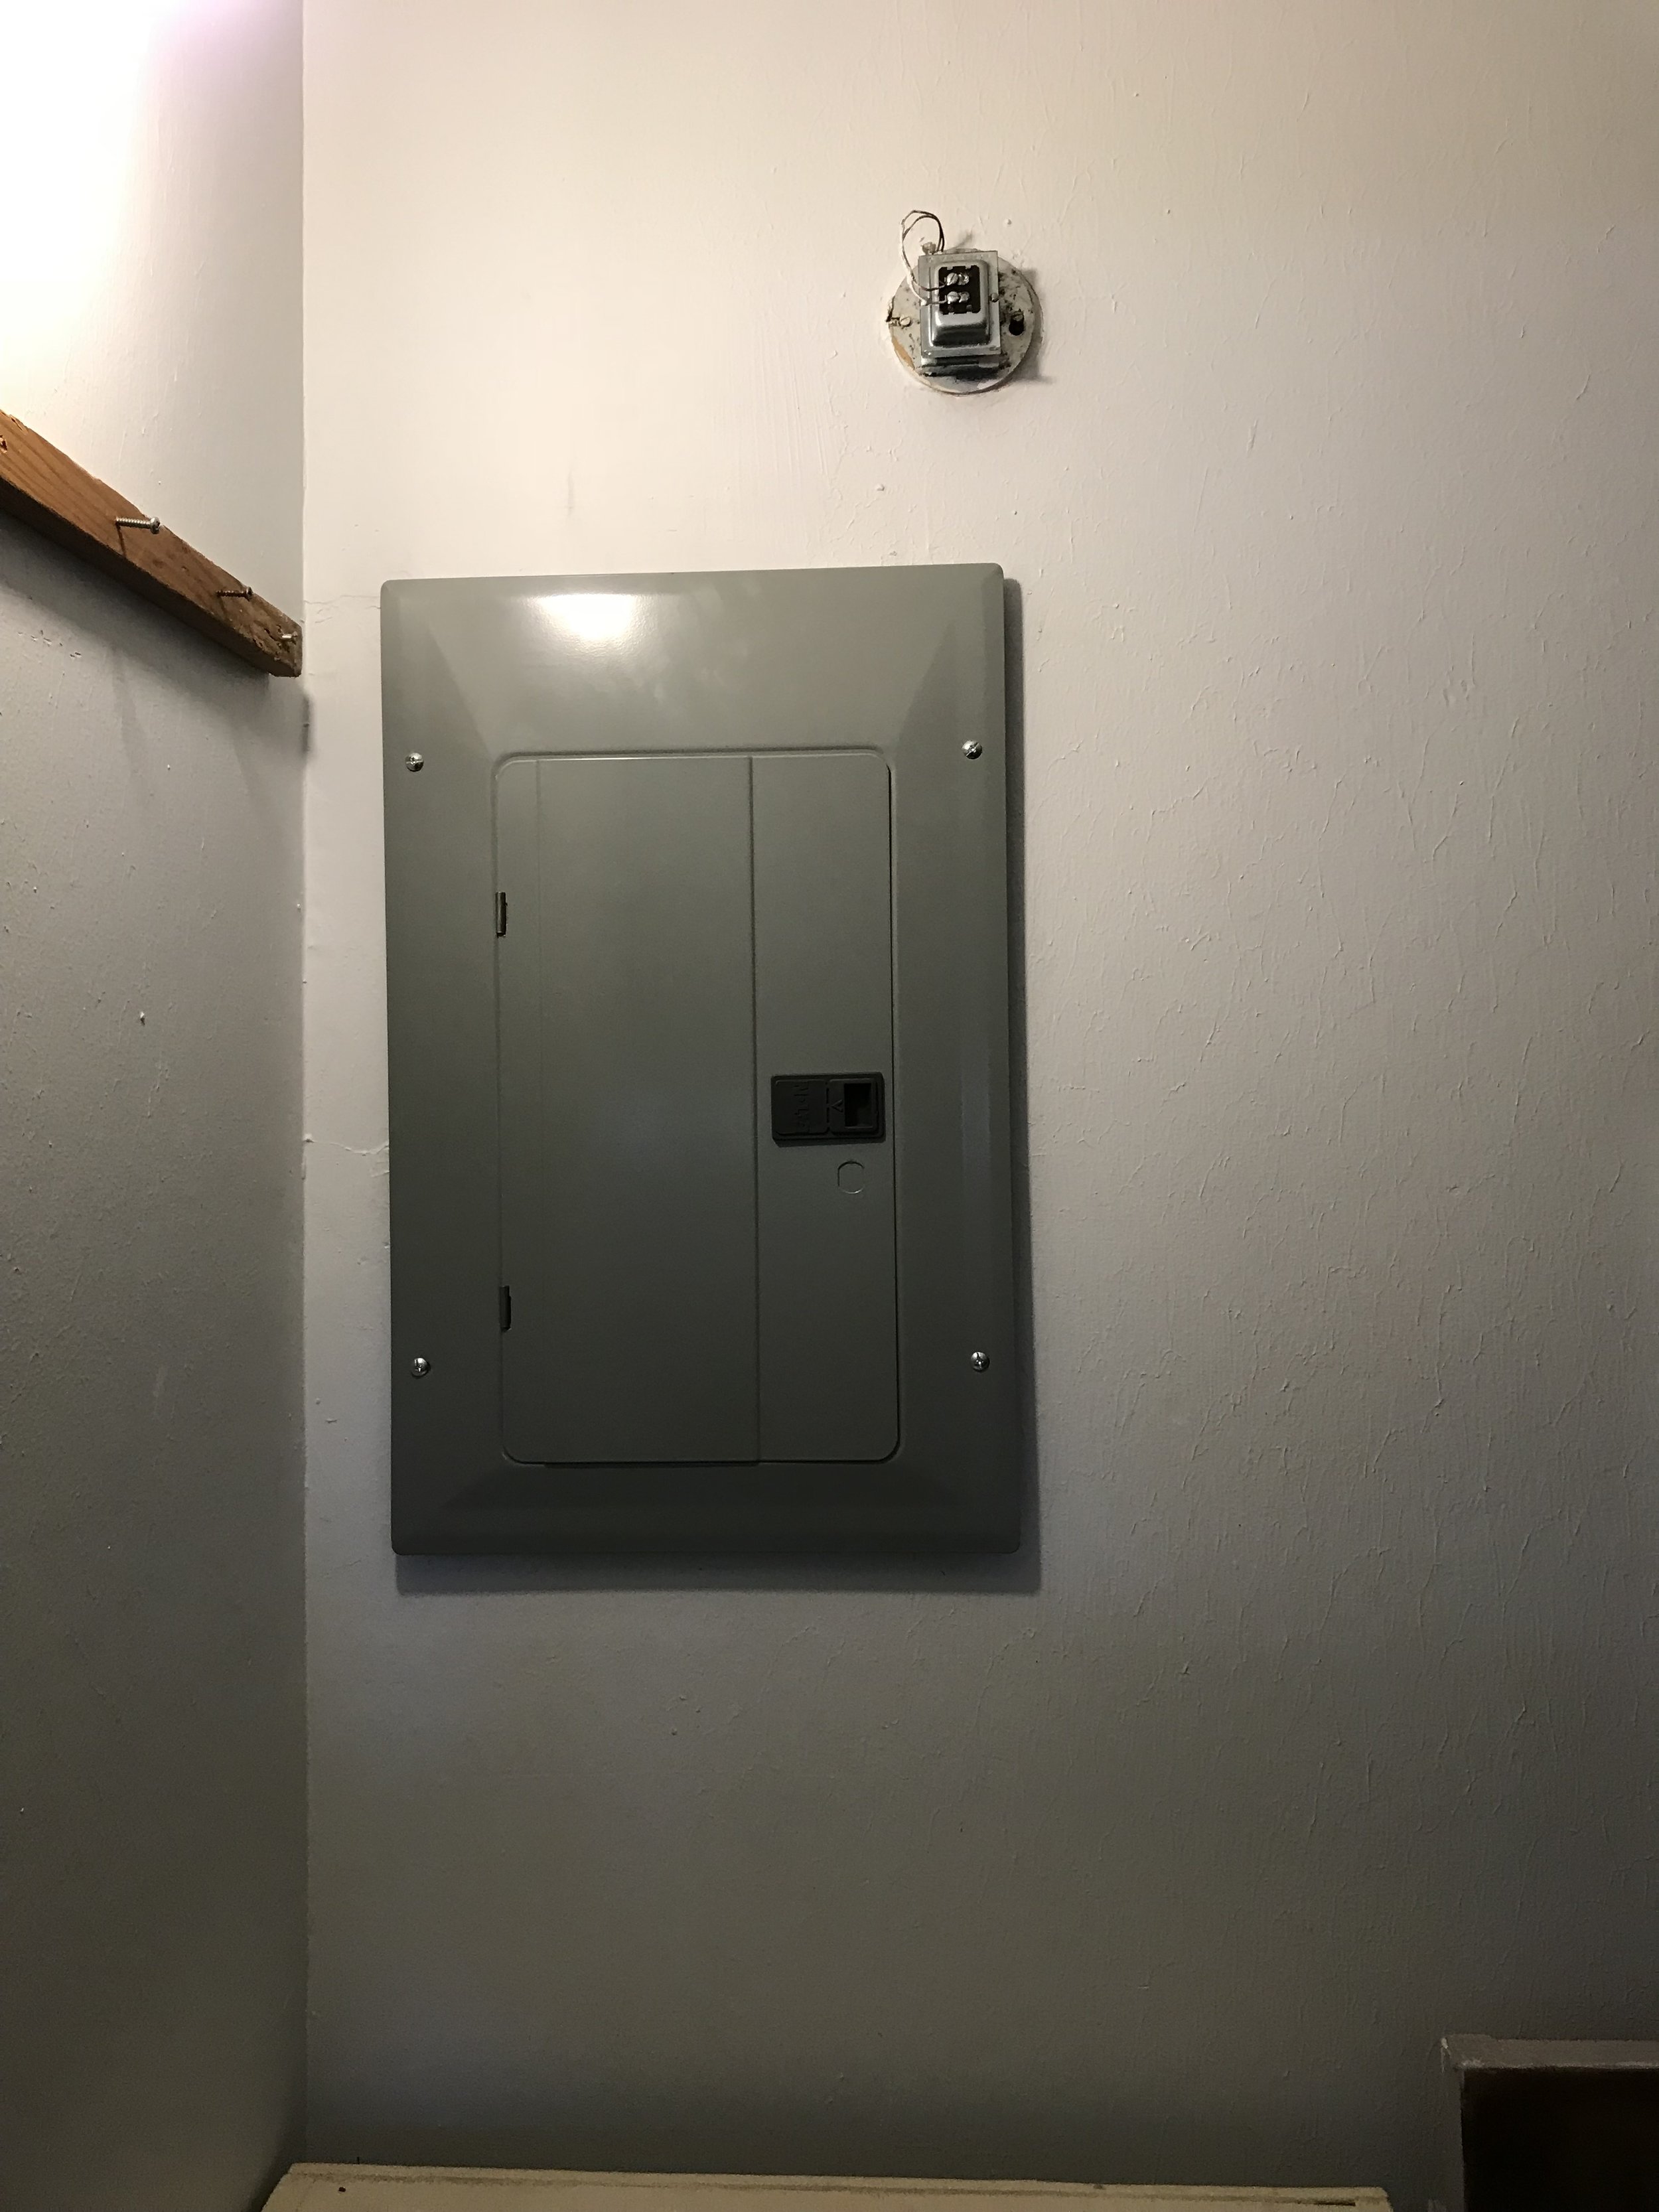 Panel and Meter Installation